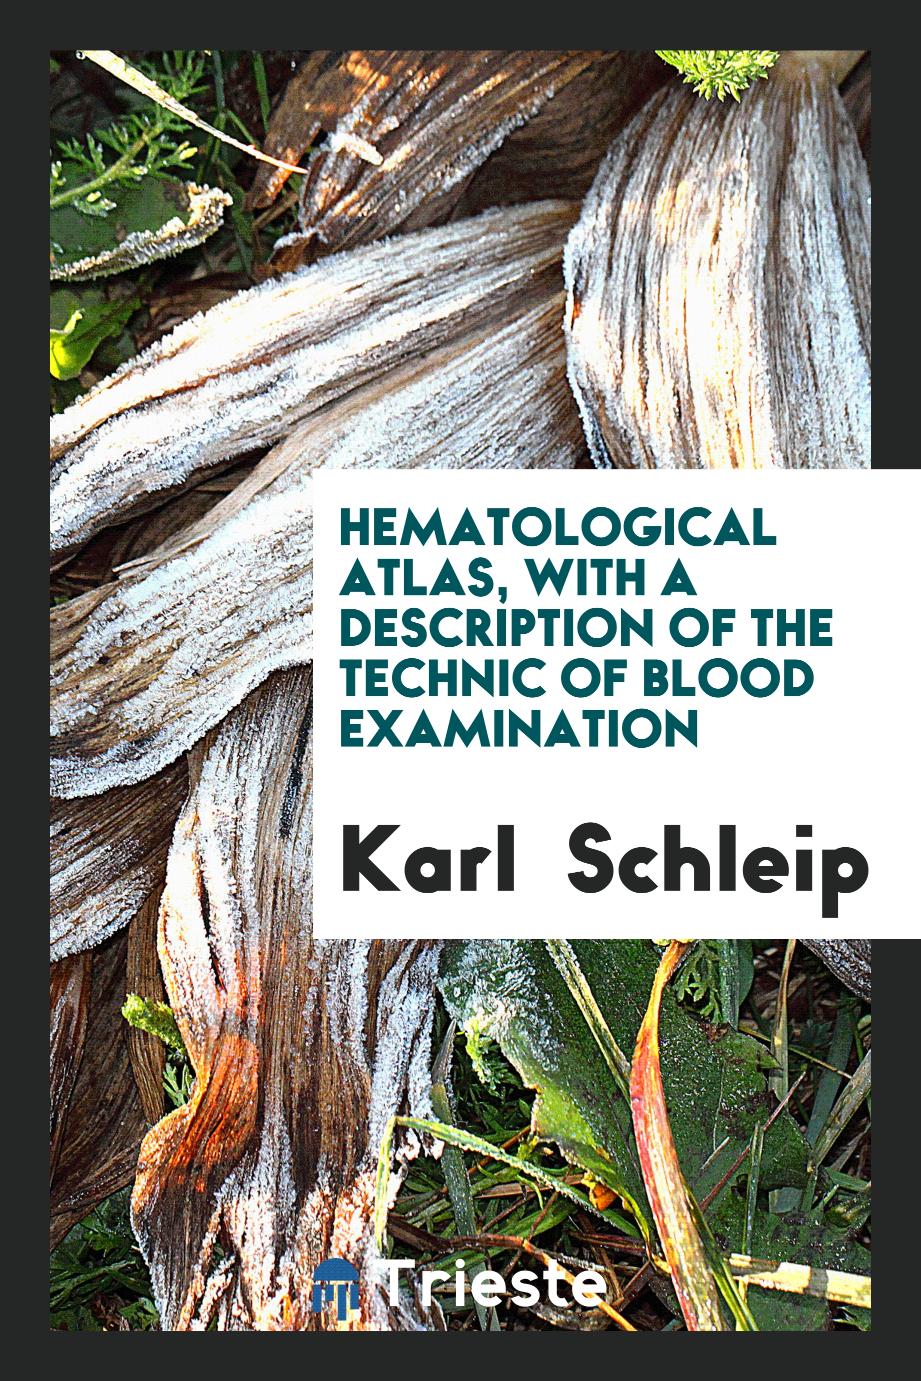 Hematological atlas, with a description of the technic of blood examination